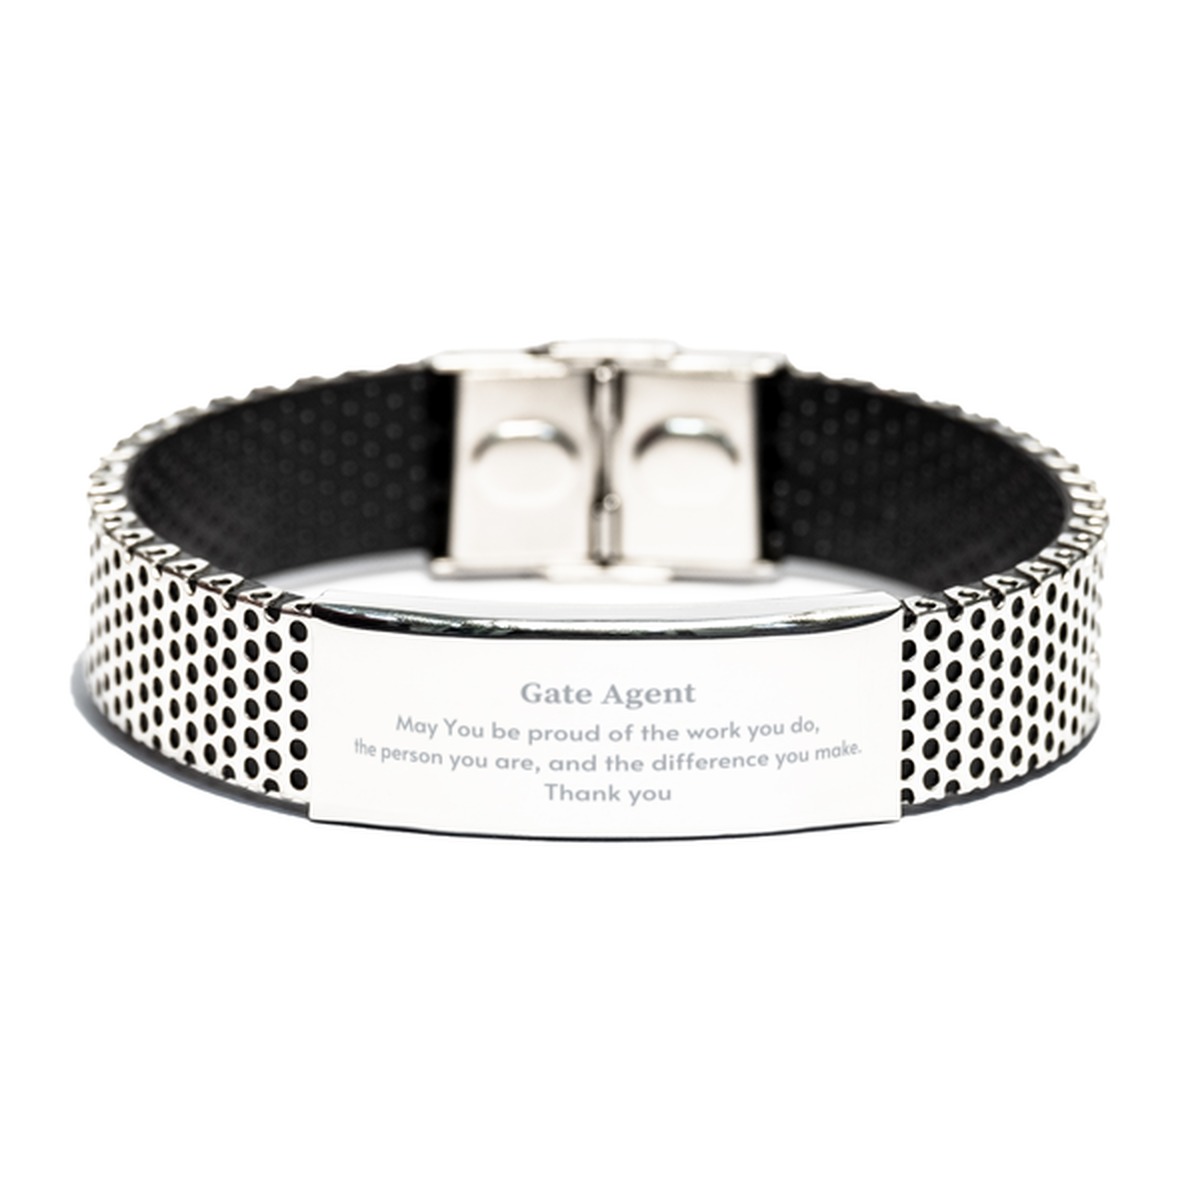 Heartwarming Stainless Steel Bracelet Retirement Coworkers Gifts for Gate Agent, Gate Agent May You be proud of the work you do, the person you are Gifts for Boss Men Women Friends